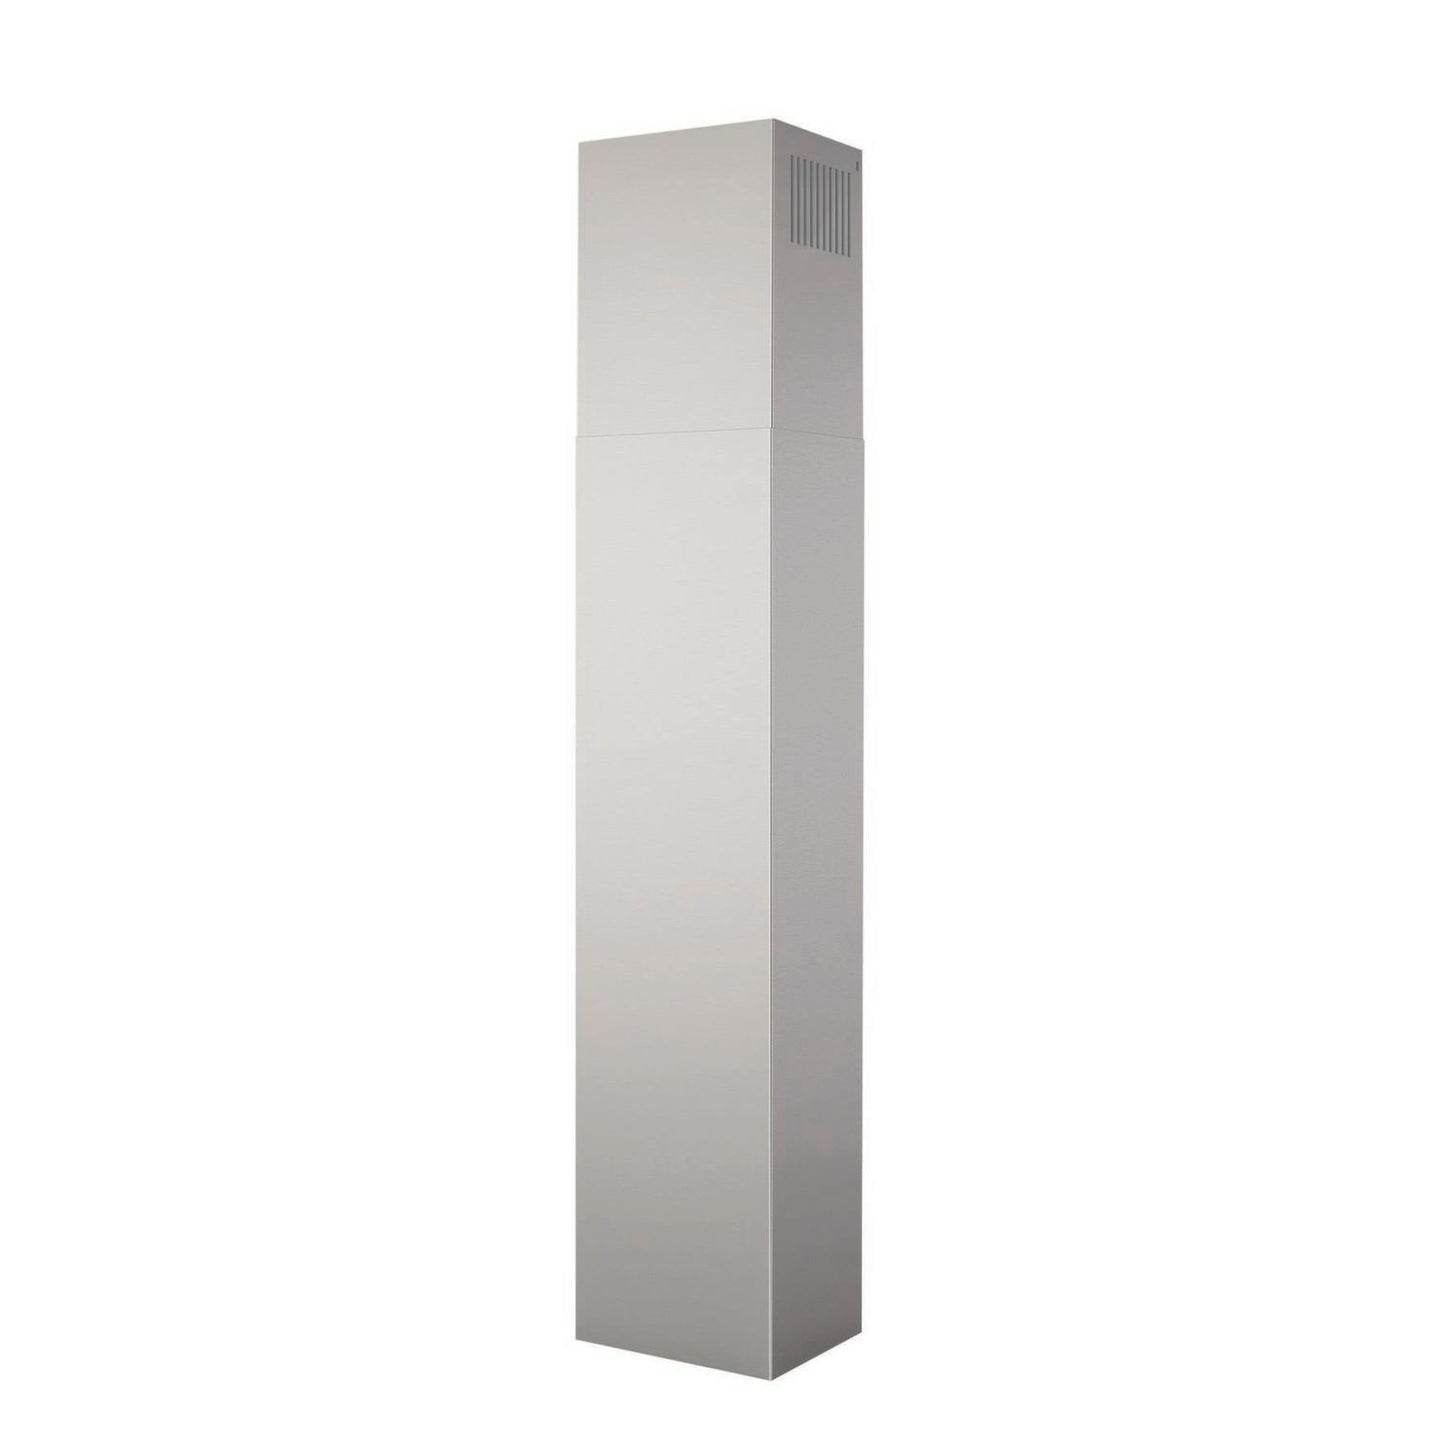 Broan AEEW48SS Ductless Flue Extension In Stainless Steel For Ew48 Series Chimney Range Hood